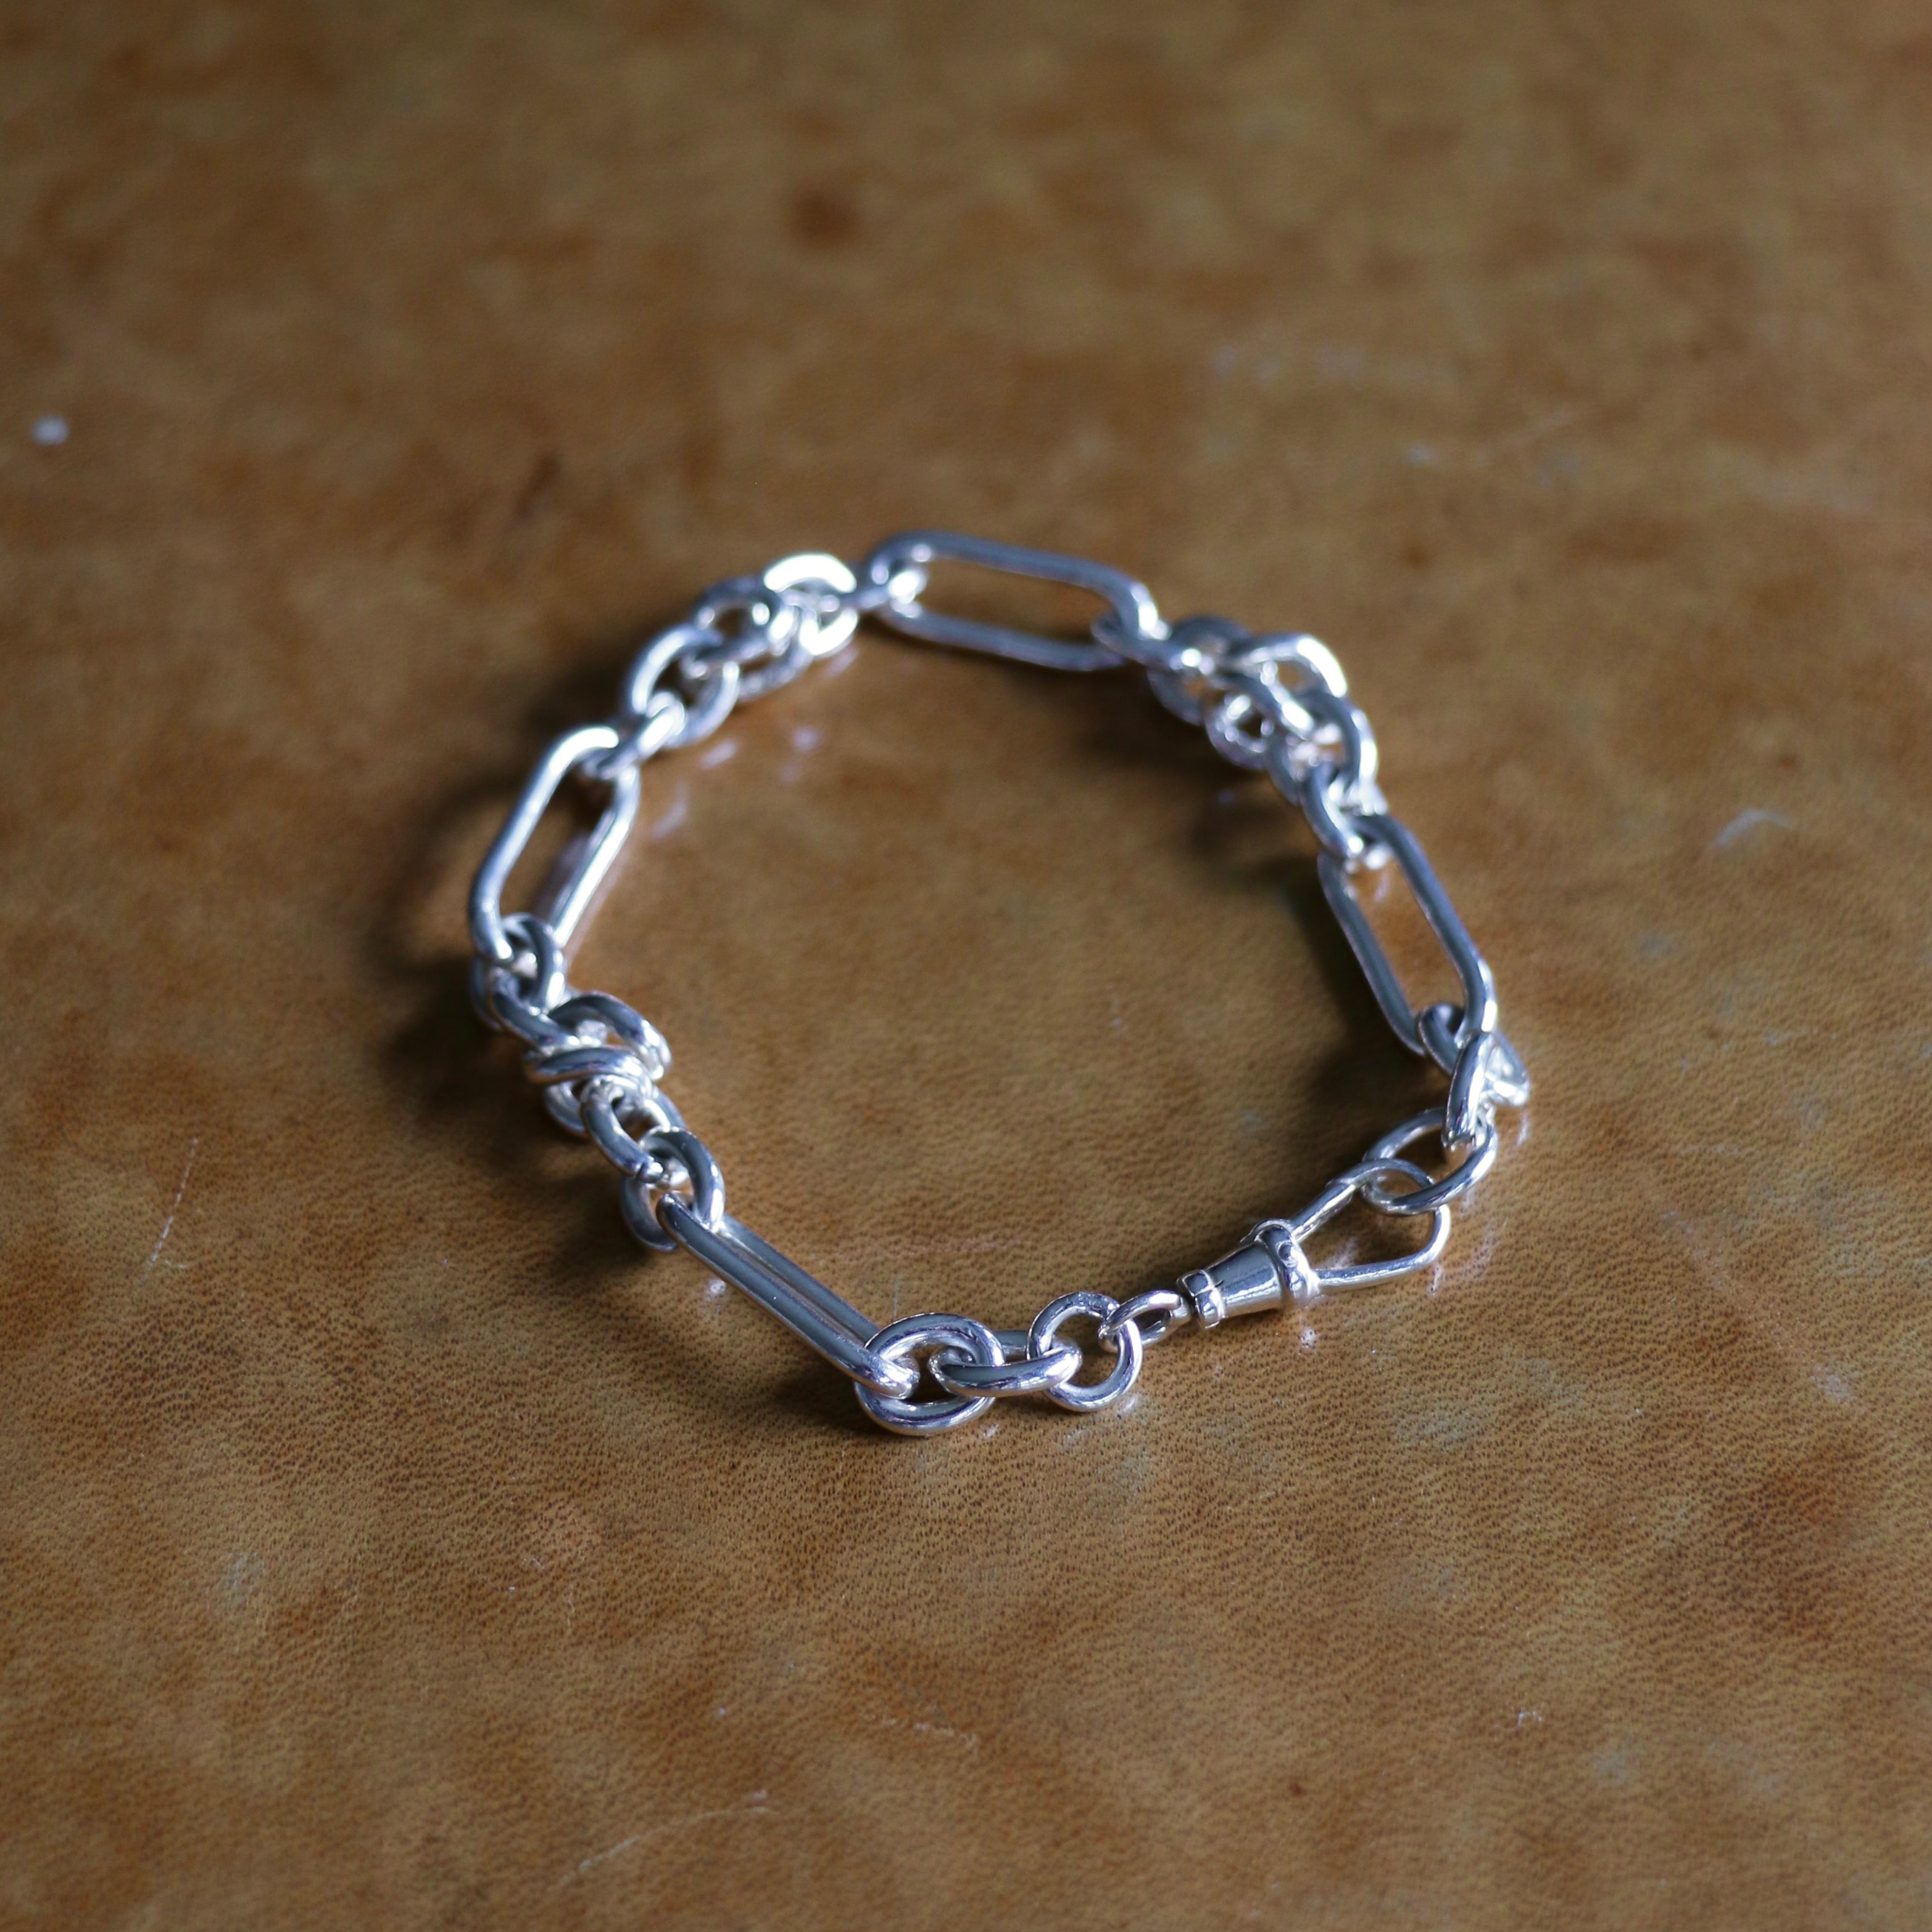 Silver Artemisia bracelet stretched out on a leather background